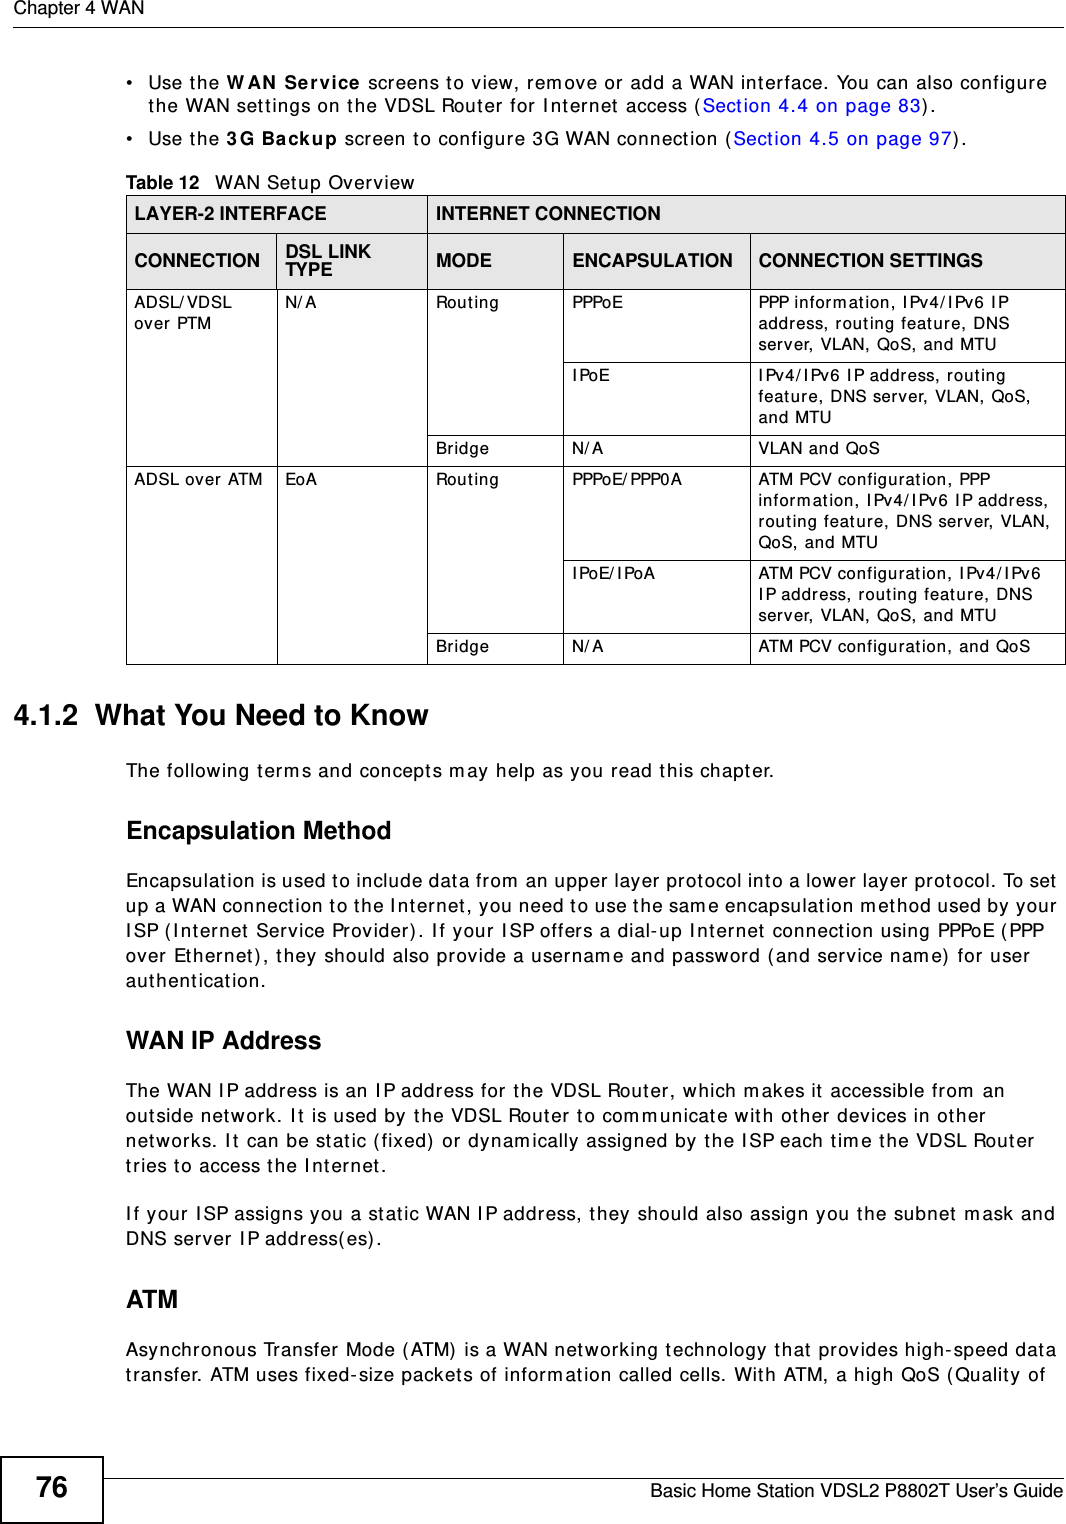 Chapter 4 WANBasic Home Station VDSL2 P8802T User’s Guide76• Use the W AN  Se rvice screens to view, rem ove or add a WAN int erface. You can also configure the WAN sett ings on t he VDSL Router for I nternet  access ( Sect ion 4.4 on page 83) .• Use the 3 G Ba ck up screen t o configure 3G WAN connect ion (Sect ion 4.5 on page 97) . 4.1.2  What You Need to KnowThe following t erm s and concept s m ay help as you r ead t his chapter.Encapsulation MethodEncapsulat ion is used t o include data from  an upper layer pr ot ocol into a lower layer prot ocol. To set up a WAN connect ion to t he I nt ernet , you need t o use t he same encapsulation m et hod used by your I SP (I nt ernet  Service Provider). I f your I SP offers a dial- up I nt ernet connect ion using PPPoE ( PPP over Ether net ), they should also provide a usernam e and password ( and service nam e)  for user aut hent icat ion.WAN IP AddressThe WAN I P address is an I P address for t he VDSL Router, which m akes it  accessible from  an out side net work. I t  is used by the VDSL Router to comm unicate wit h ot her devices in other  net works. I t  can be st atic ( fixed)  or dynam ically assigned by t he I SP each t im e t he VDSL Rout er tries t o access t he I nter net .I f your I SP assigns you a st at ic WAN I P address, t hey should also assign you the subnet  m ask and DNS server I P address( es) .ATMAsynchronous Transfer Mode ( ATM)  is a WAN net working t echnology t hat  prov ides high- speed dat a transfer. ATM uses fixed- size packets of inform at ion called cells. With ATM, a high QoS ( Qualit y of Table 12   WAN Set up Overview LAYER-2 INTERFACE INTERNET CONNECTIONCONNECTION DSL LINK TYPE MODE ENCAPSULATION CONNECTION SETTINGSADSL/ VDSL over PTMN/ A Routing PPPoE PPP inform at ion, I Pv4/ IPv6 I P addr ess, rout ing feat ure, DNS server, VLAN, QoS, and MTUI PoE I Pv4/ I Pv6 I P address, rout ing feature, DNS server, VLAN, QoS,  and MTUBridge N/ A VLAN and QoSADSL over ATM EoA Routing PPPoE/ PPP0A ATM PCV configurat ion, PPP inform at ion, I Pv4/ I Pv6 IP address, rout ing feat ure, DNS server, VLAN, QoS, and MTUI PoE/ I PoA ATM PCV configurat ion, I Pv4/ I Pv6 I P address, rout ing feat ure, DNS server, VLAN, QoS, and MTUBridge N/ A ATM PCV configurat ion, and QoS